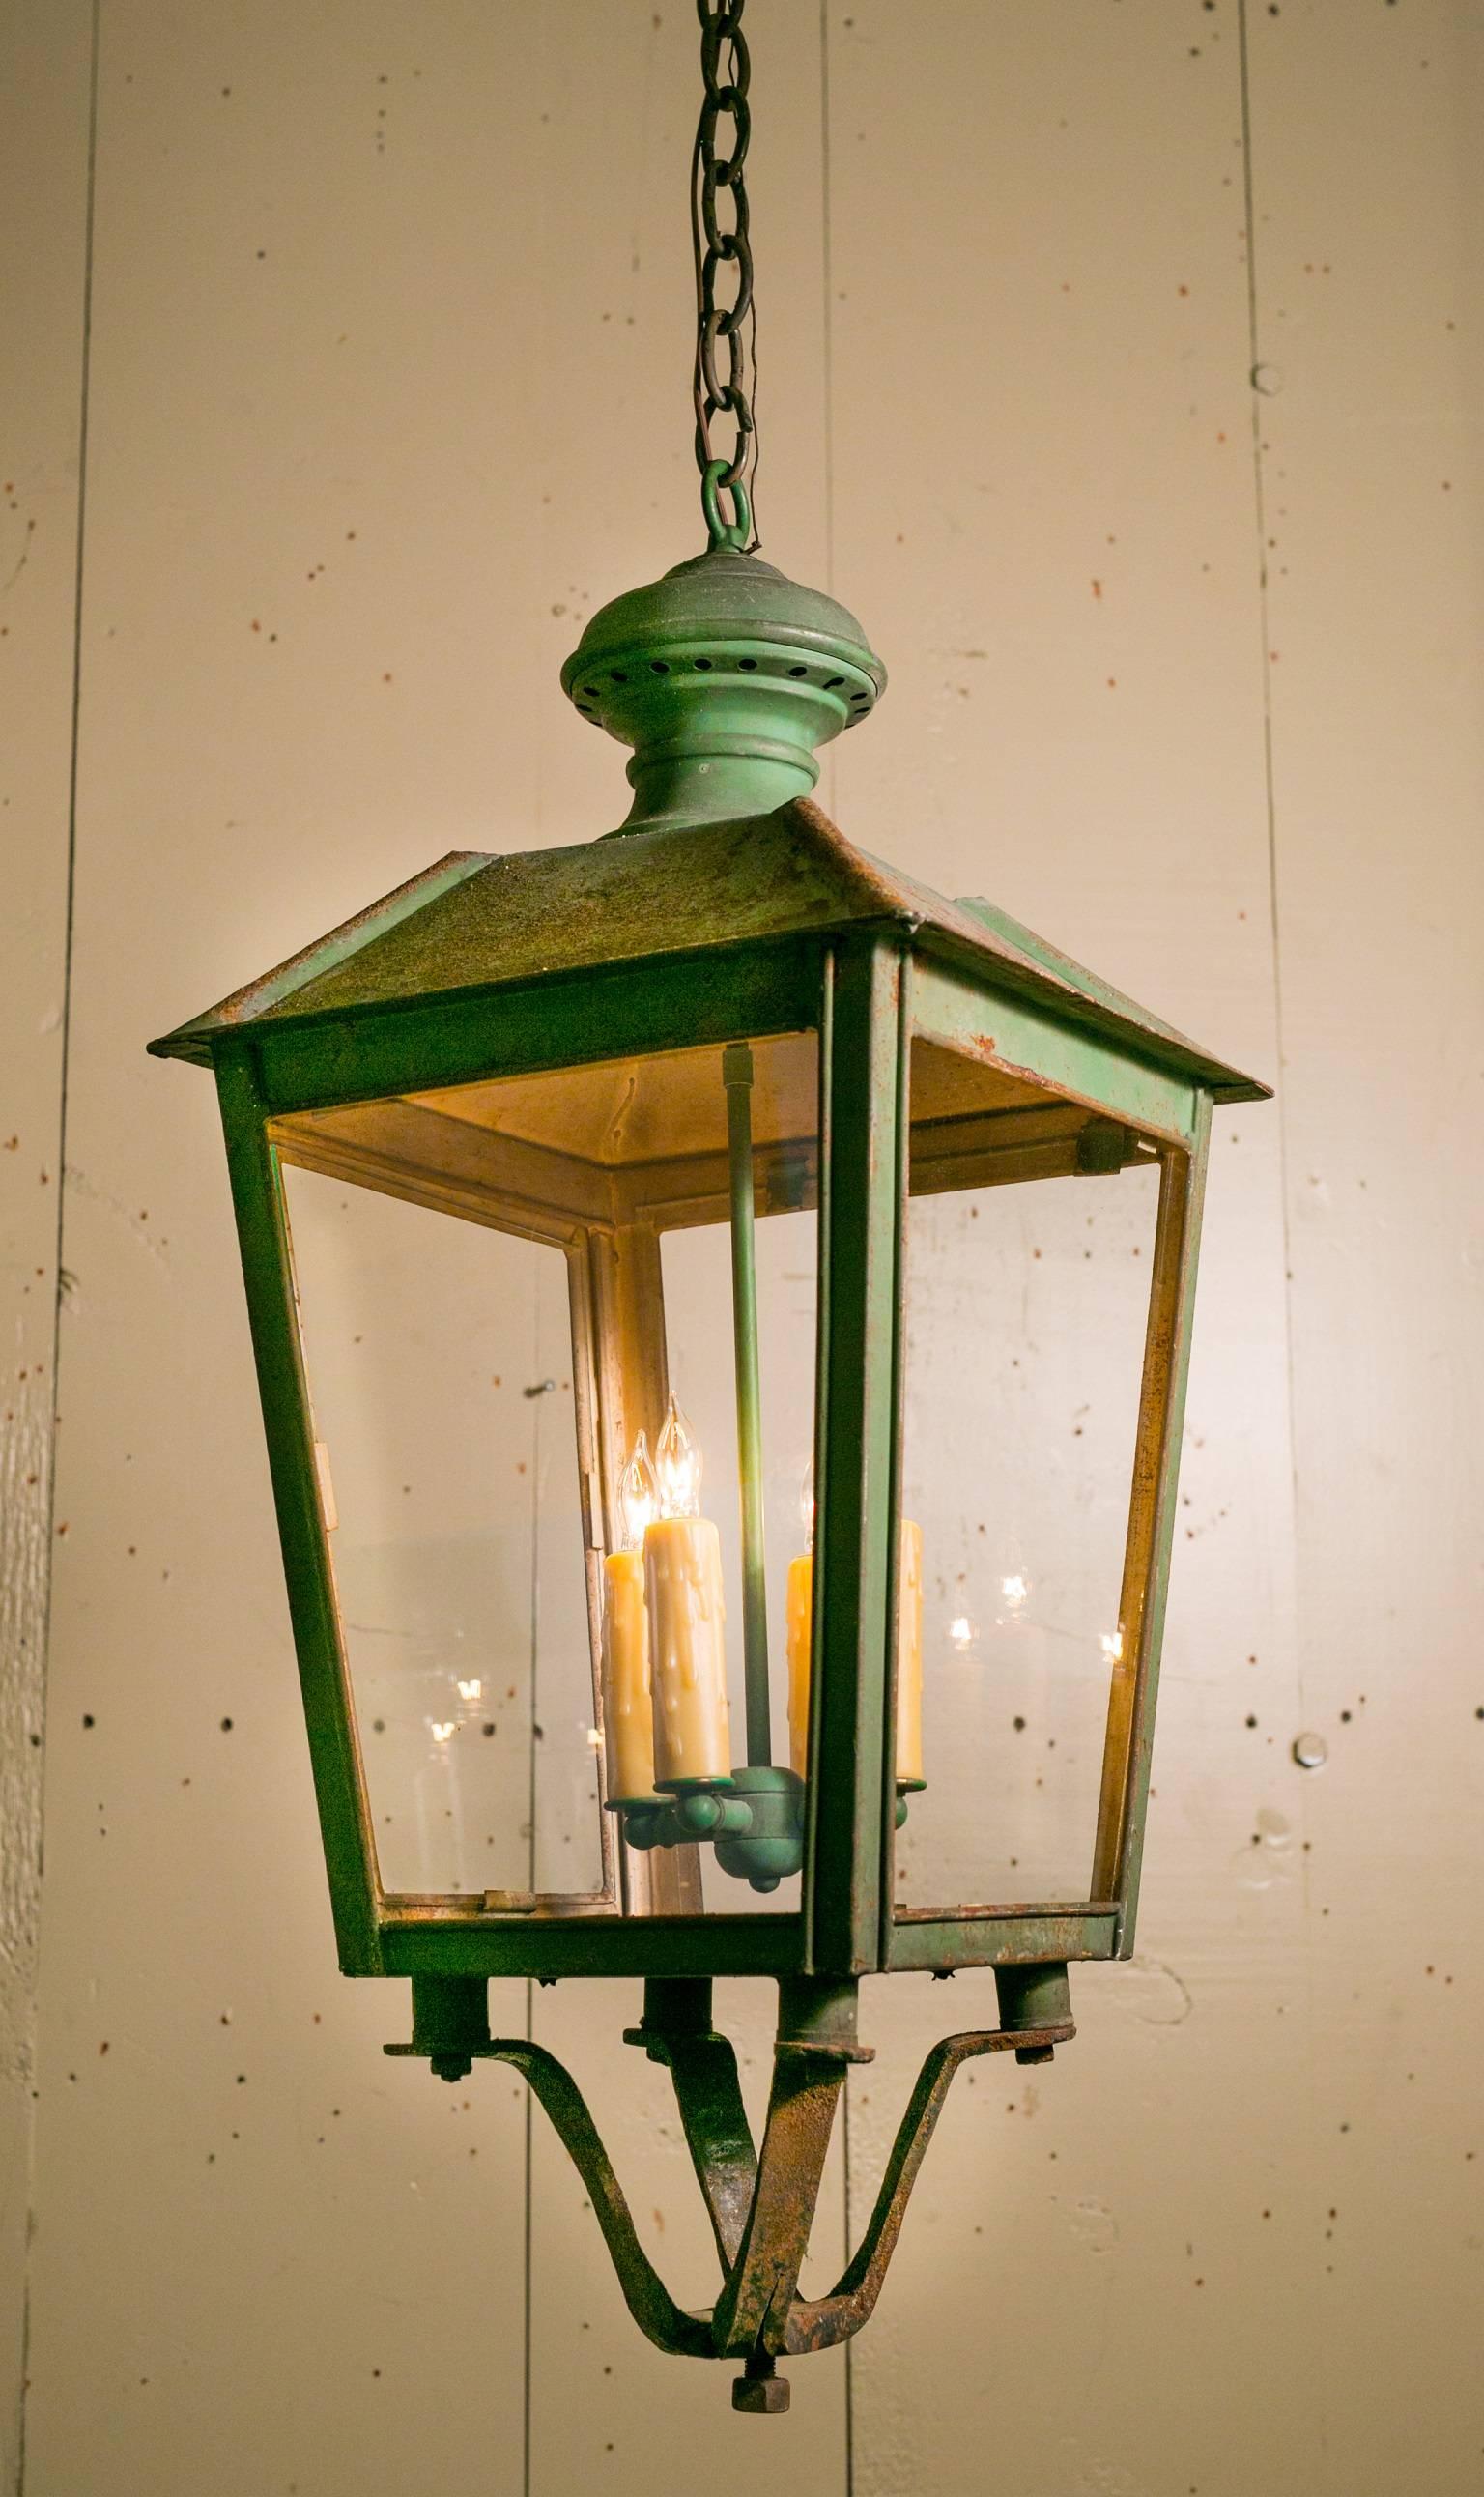 Pair of vintage iron lanterns with original green paint.  From France, circa 1920. Comes with matching chains and canopies.  Newly rewired in the USA with all UL approved parts and a four light candelabra cluster.  Price is for the pair.